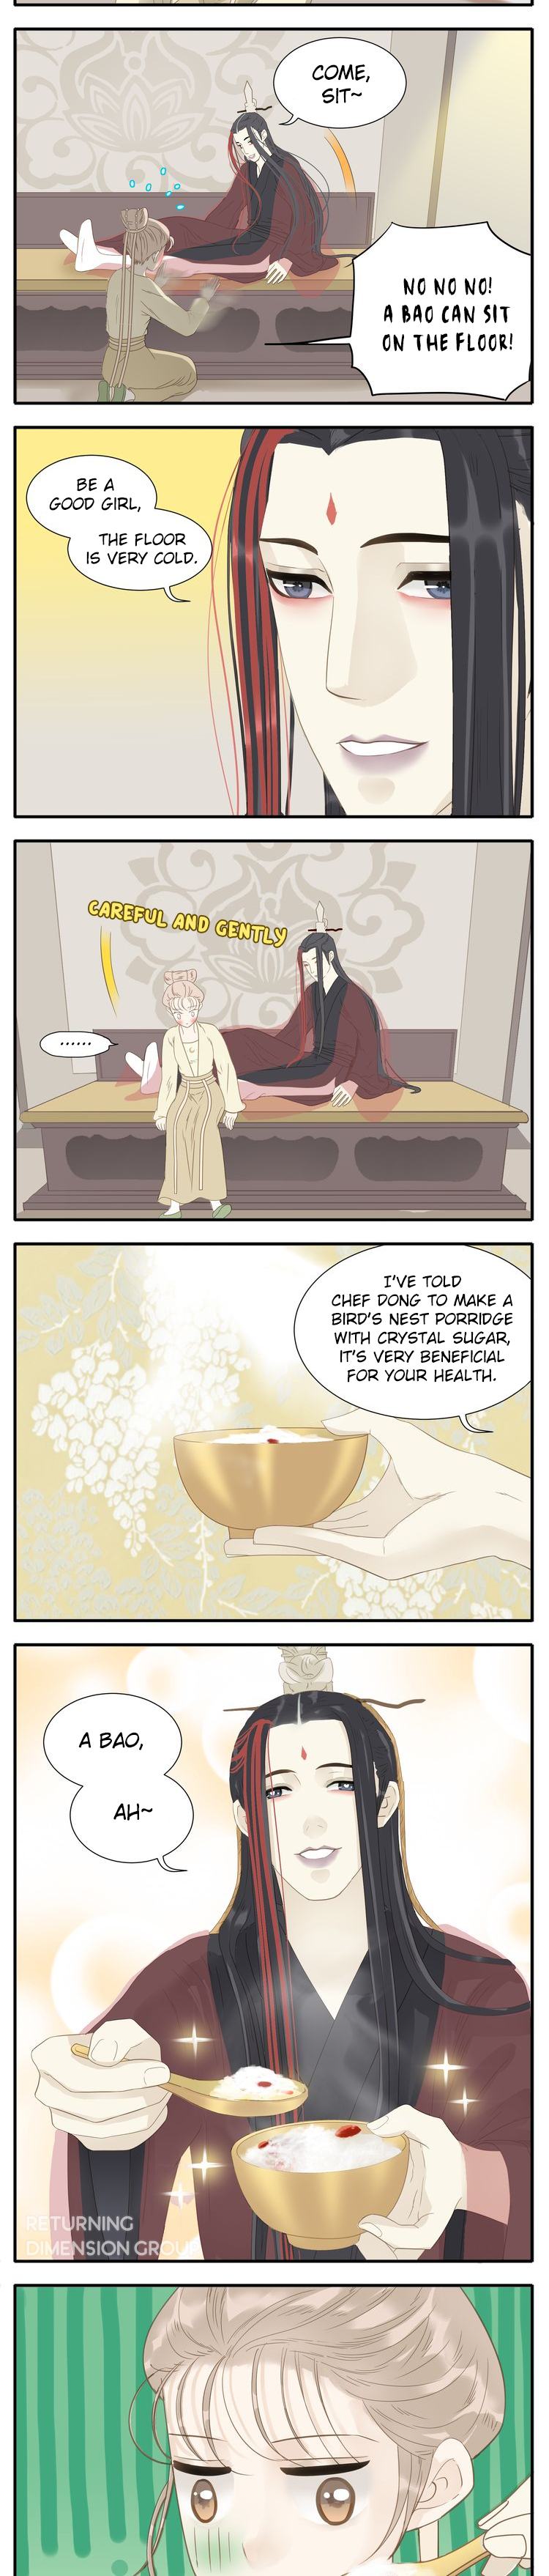 My Lord, Pay Attention To Your Reputation! - Page 2